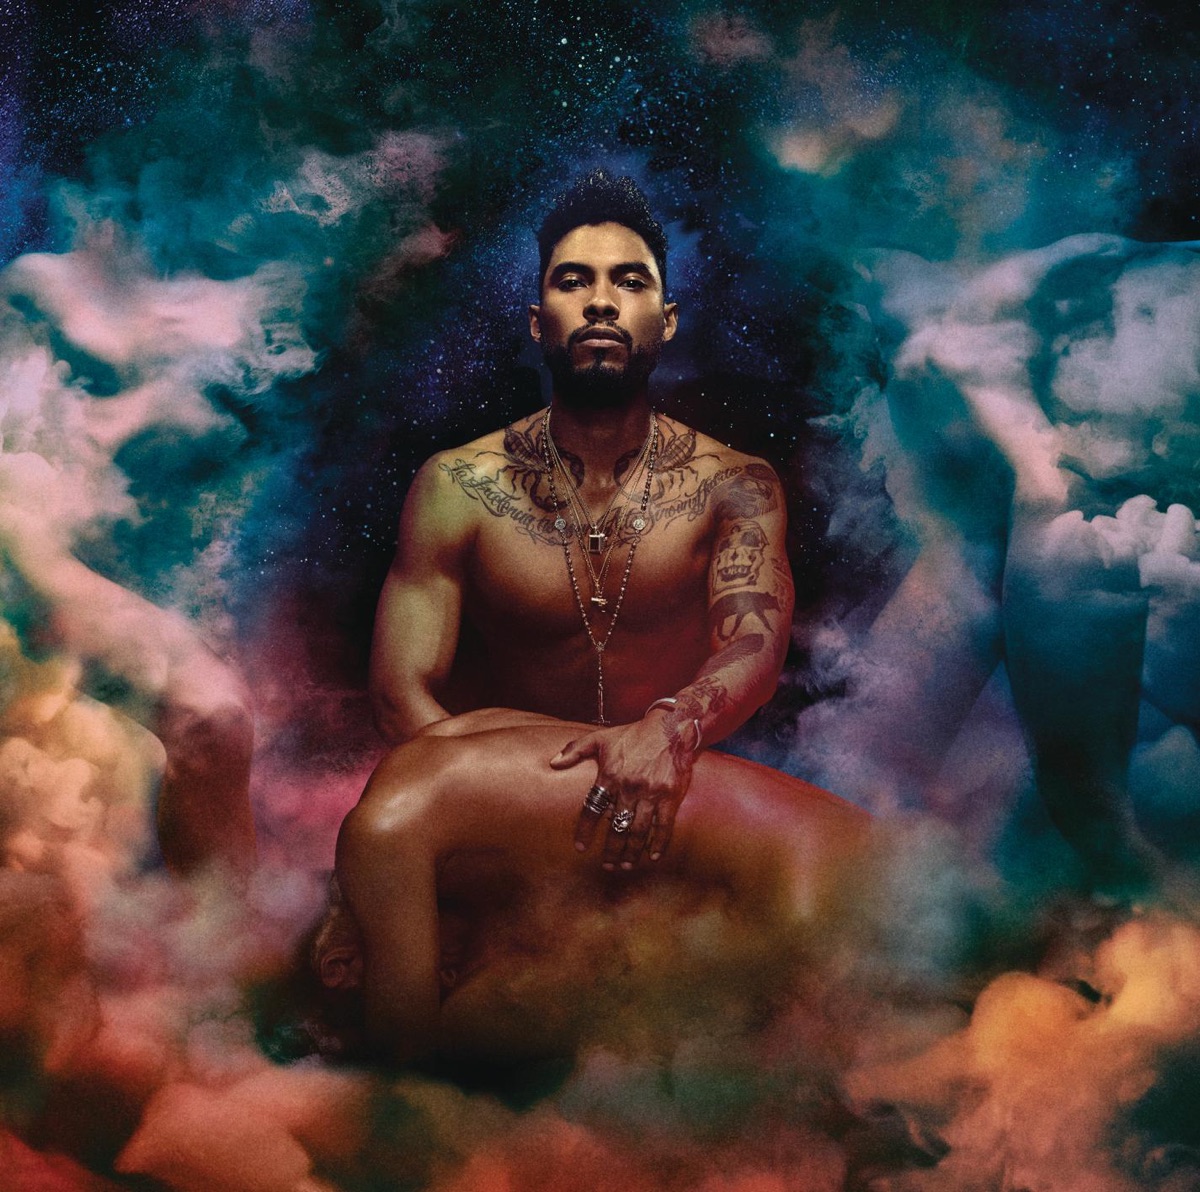 Wildheart (Deluxe) by Miguel on Apple Music